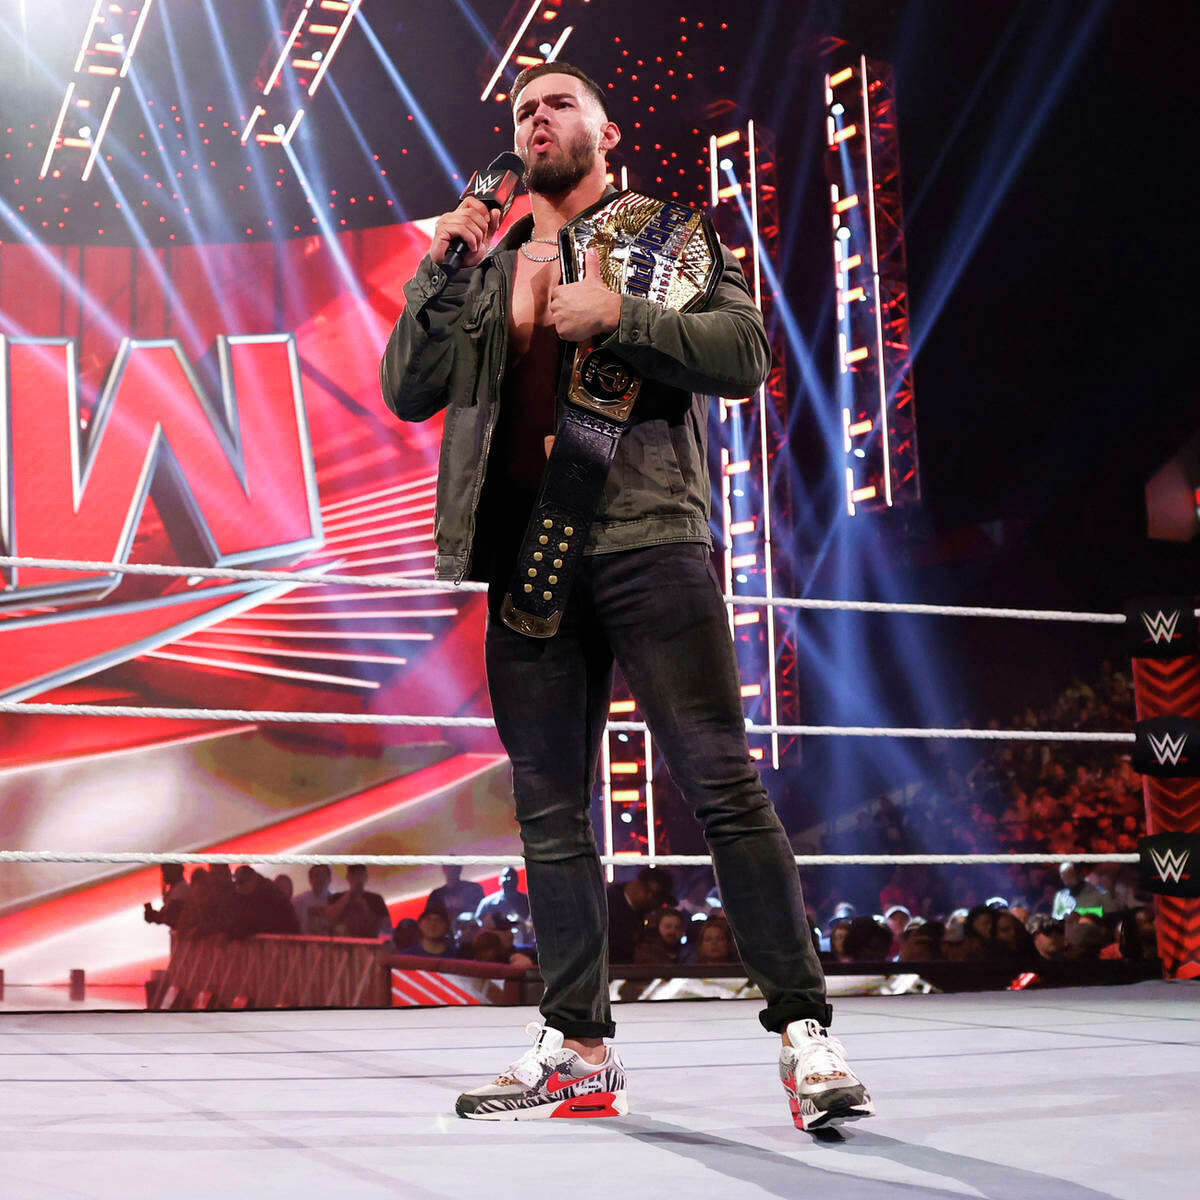 Austin Theory won the 2022 Money in the Bank. He then went on to become WWE’s youngest ever U.S champion. The Express-News interviewed Theory ahead of the 2023 Royal Rumble that takes place Saturday at the Alamodome. Theory is expected to compete in the 30-man modified battle royal in which the participants enter at timed intervals instead of all beginning in the ring at the same time. 